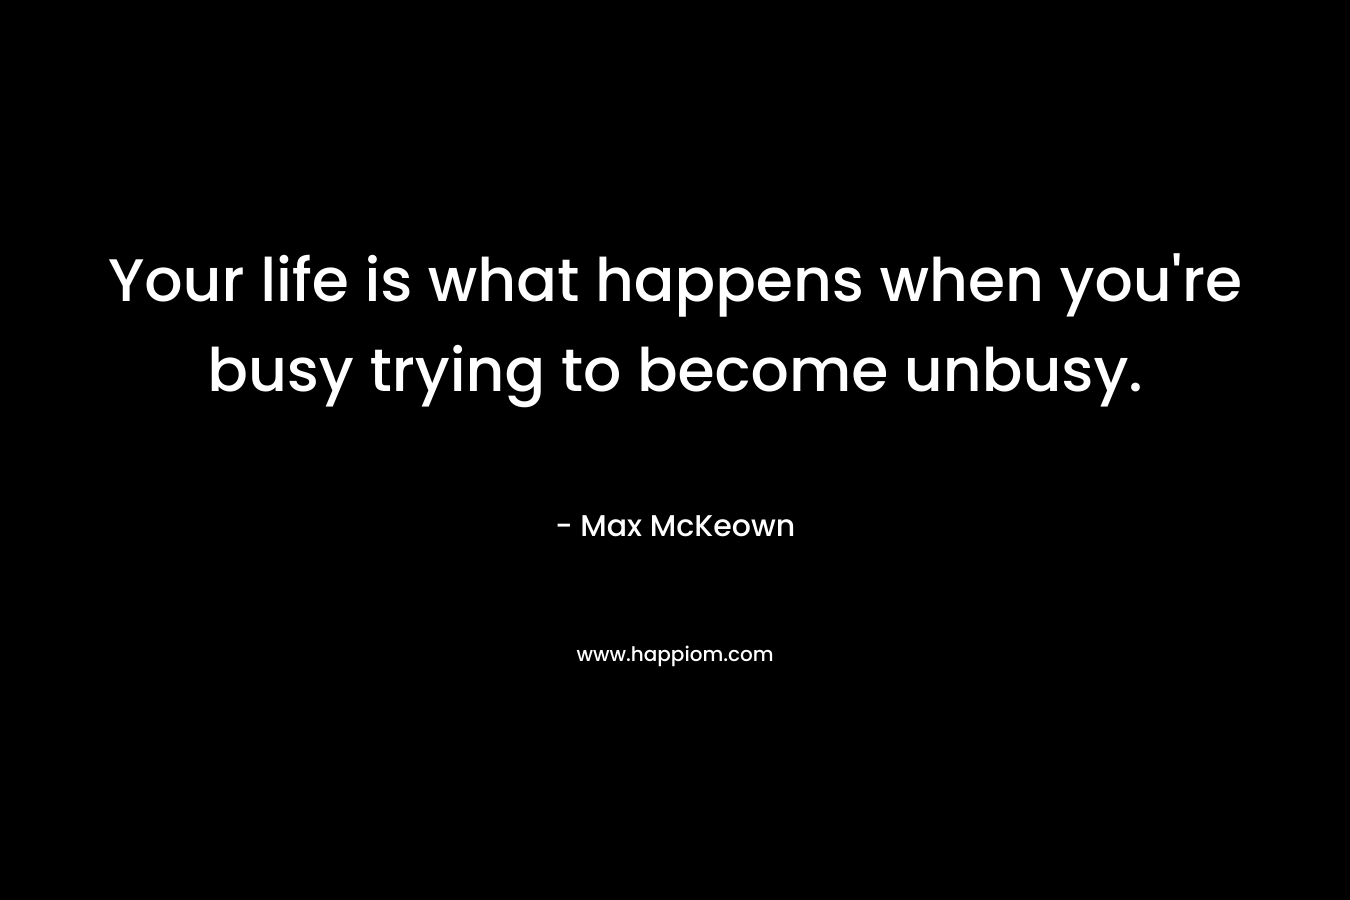 Your life is what happens when you’re busy trying to become unbusy. – Max McKeown